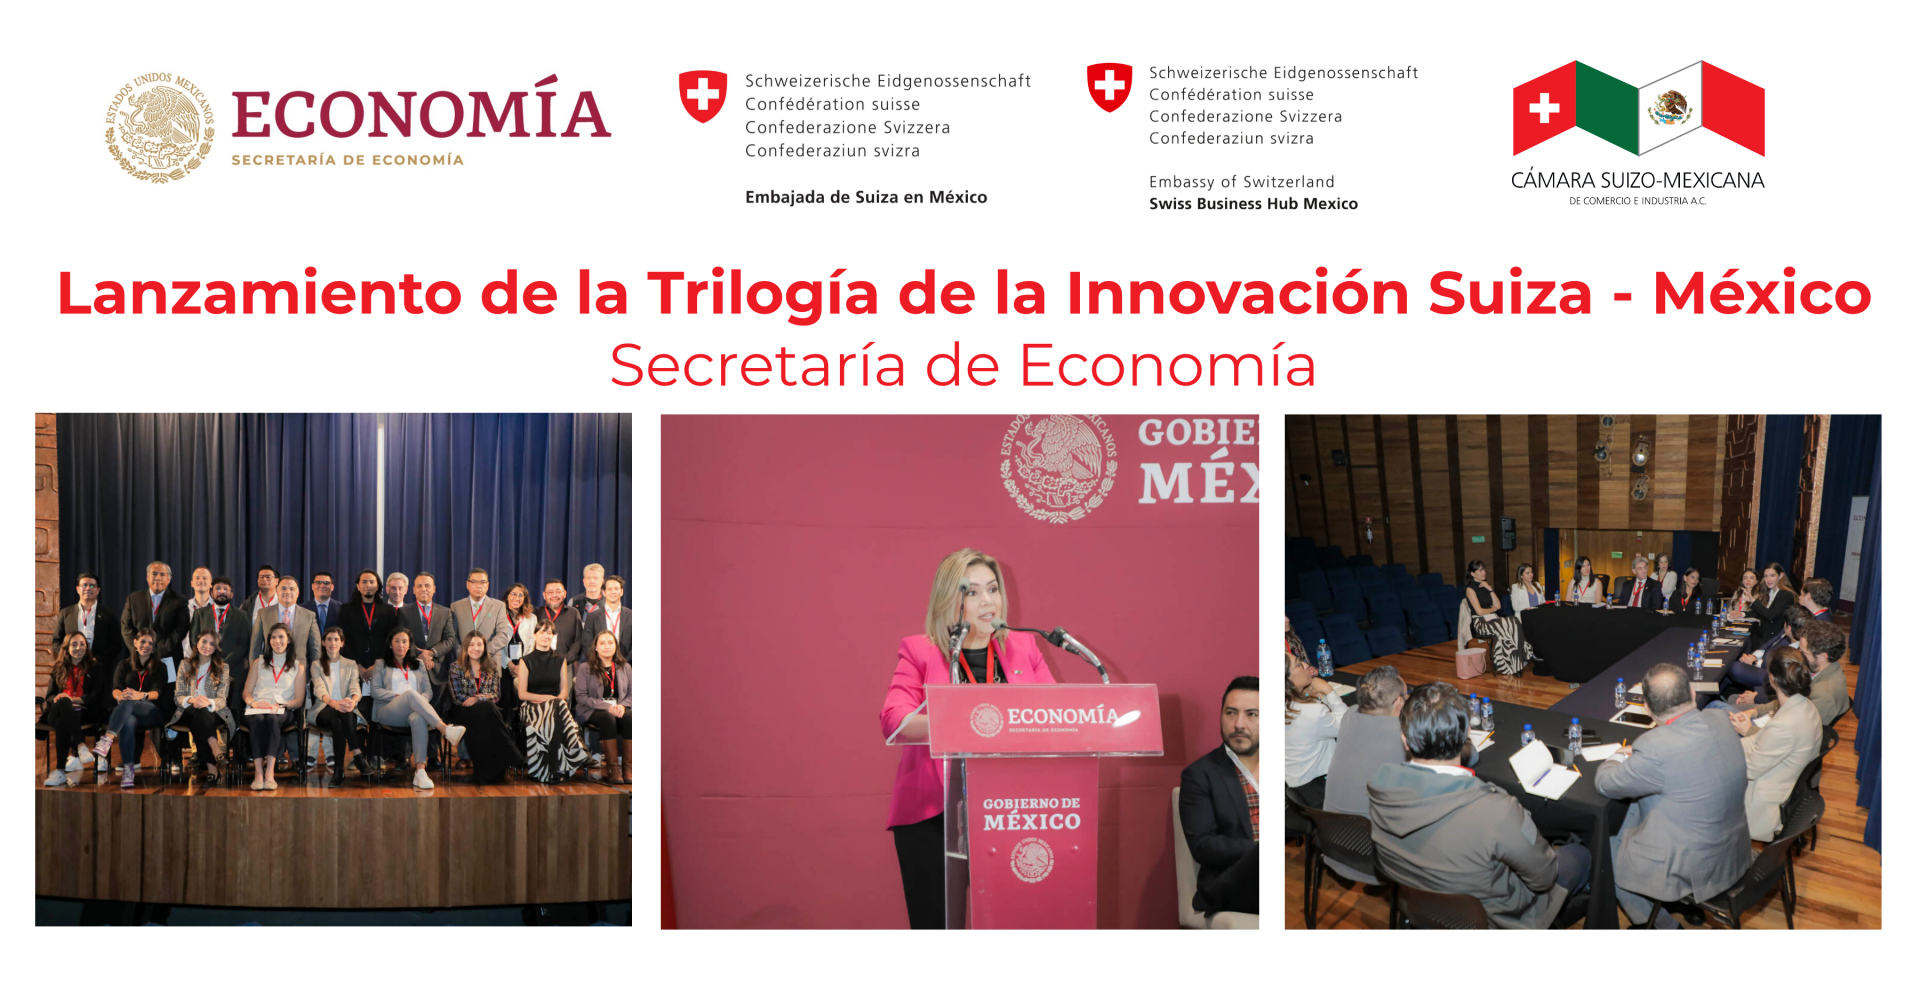 Launch of the Switzerland-Mexico Innovation Trilogy